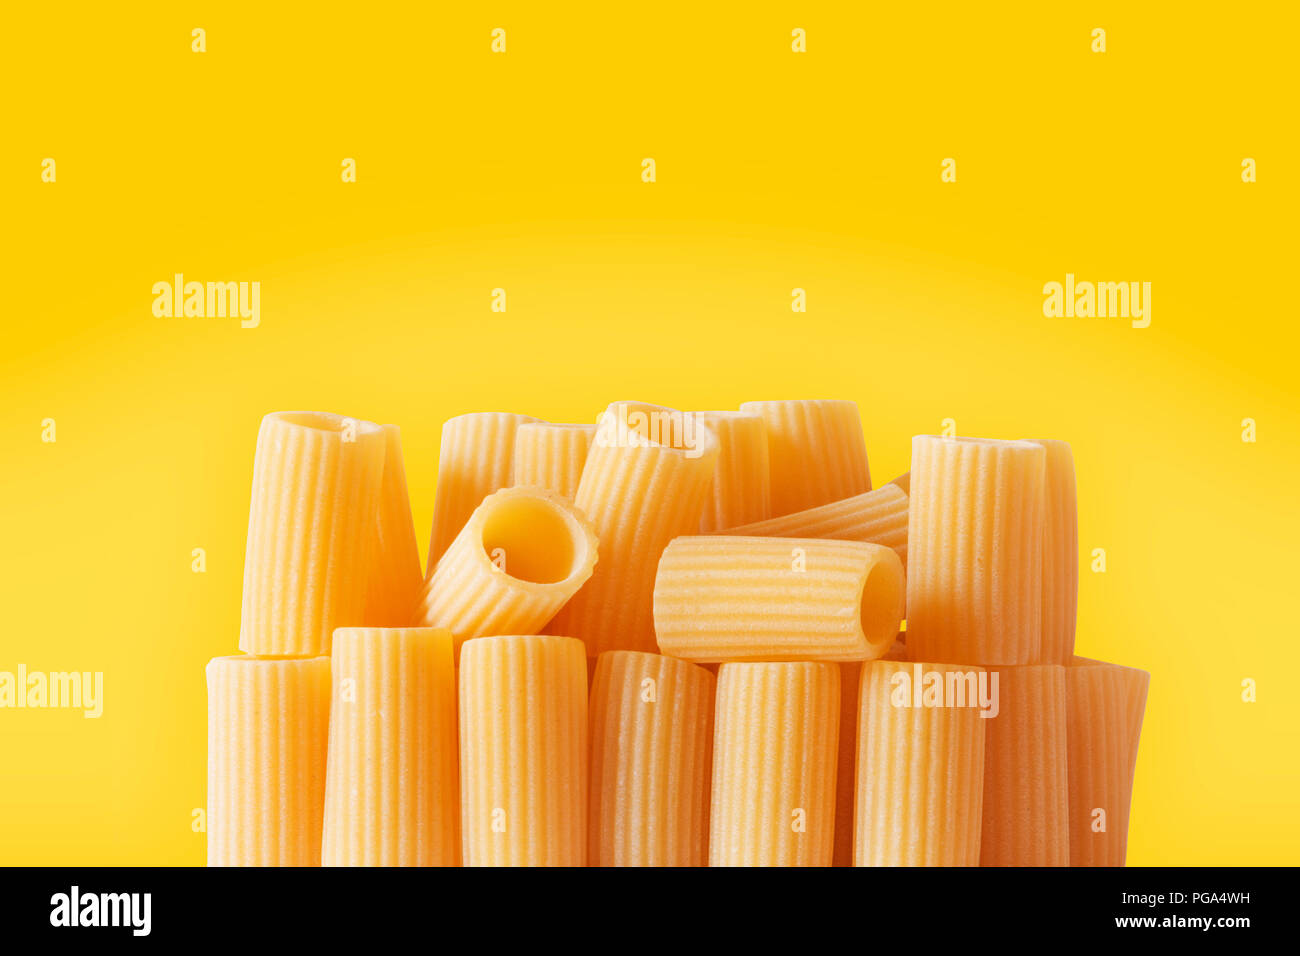 Italian pasta called rigatoni on a colored background ,tube-shaped pasta with ridges down their lenght , studio shot , Stock Photo